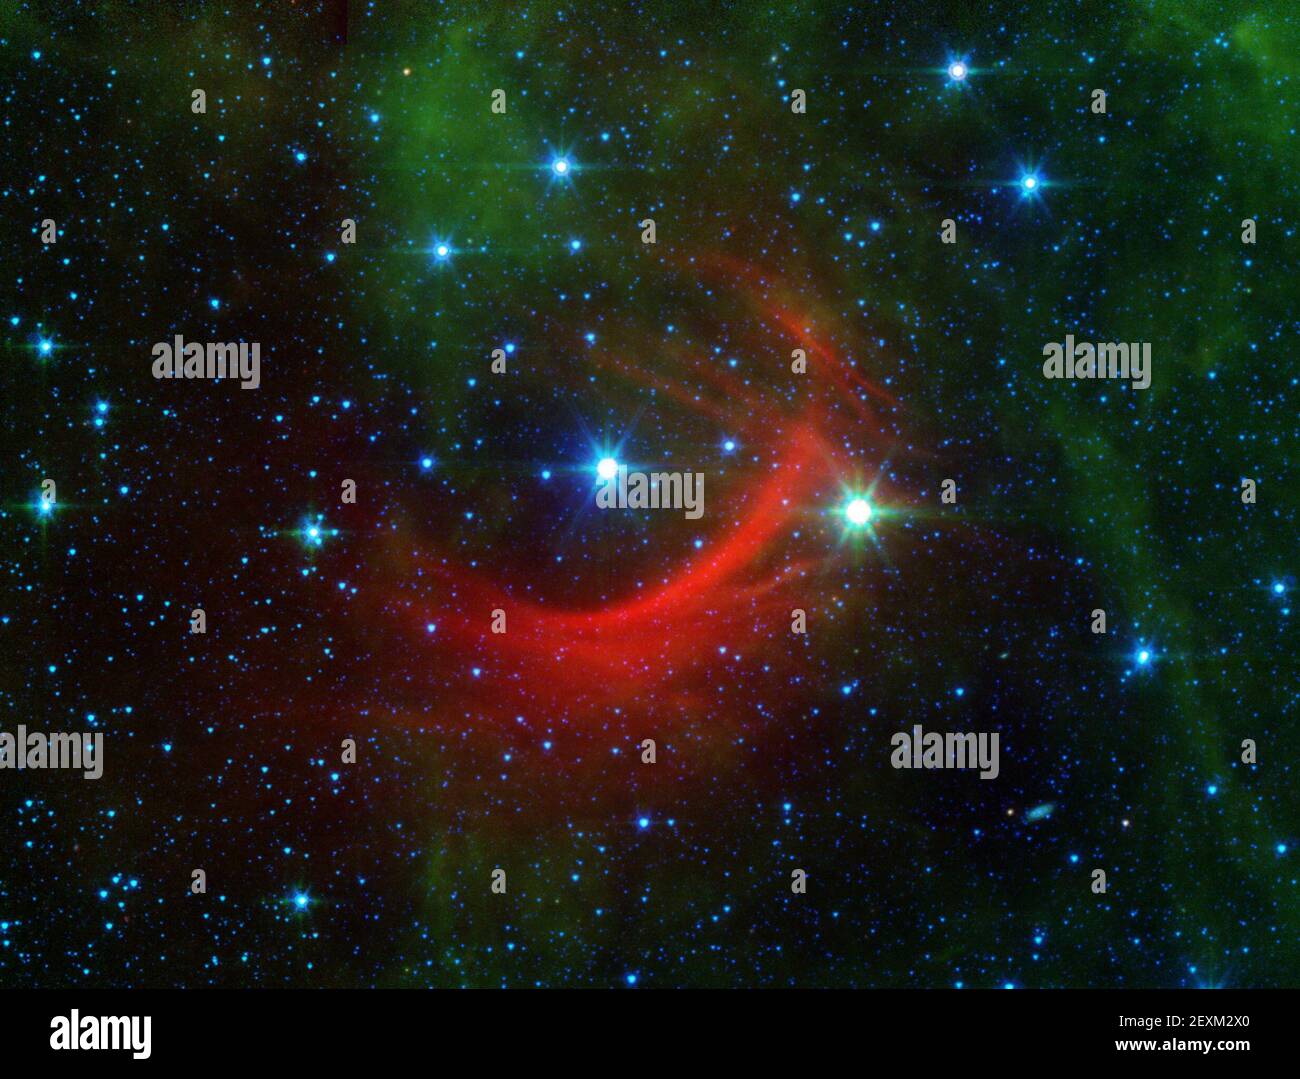 Roguish runaway stars can have a big impact on their surroundings as they  plunge through the Milky Way galaxy. Their high-speed encounters shock the  galaxy, creating arcs, as seen in this newly